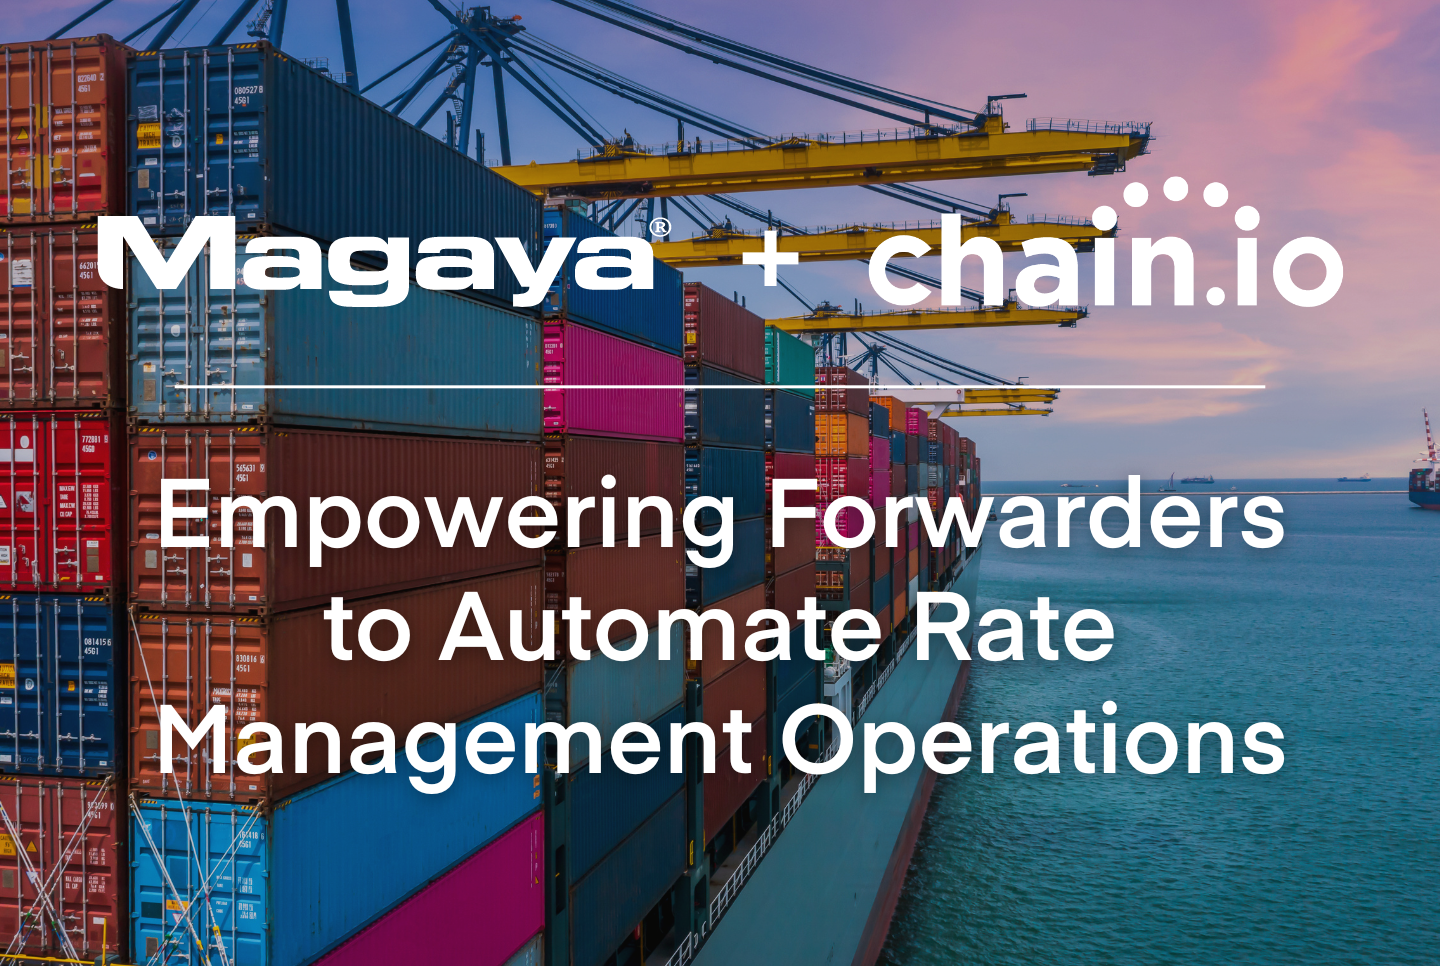 Magaya and Chain.io join forces to automate rate management operations for freight forwarders